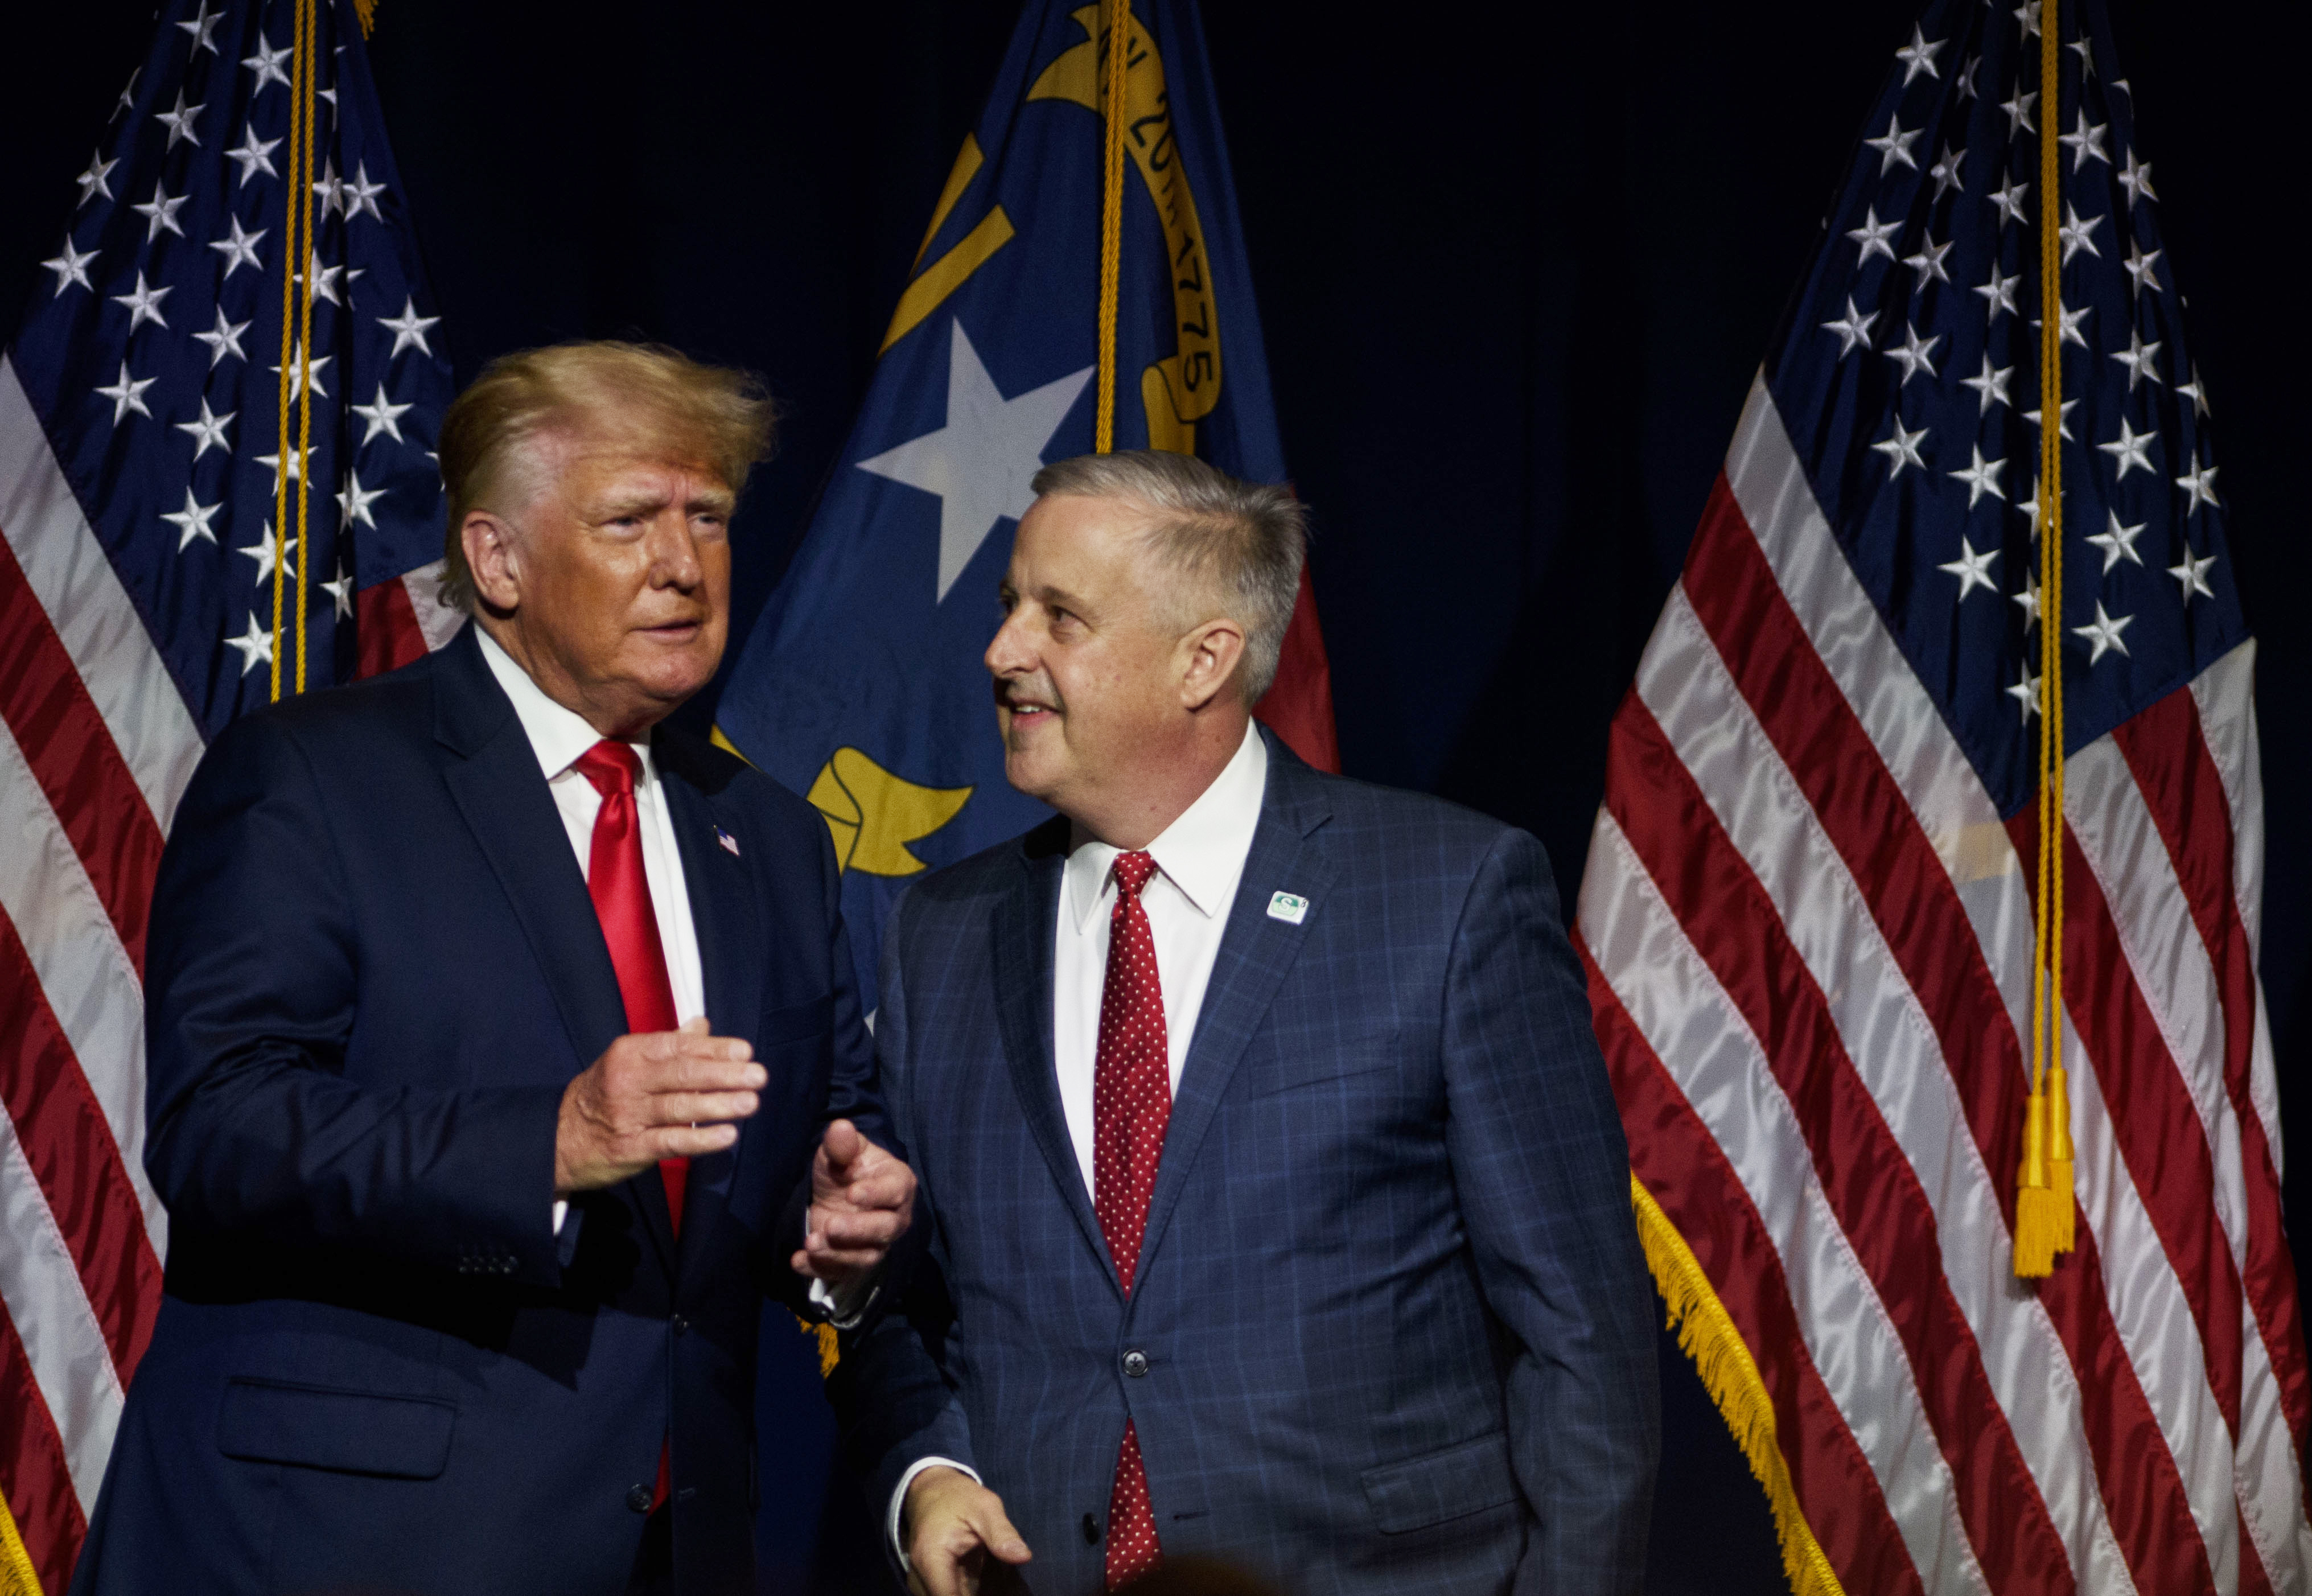 Former President Donald Trump takes the stage with NCGOP Chairman Michael Whatley after being announced at the NCGOP state convention on June 5, 2021 in Greenville, North Carolina. 